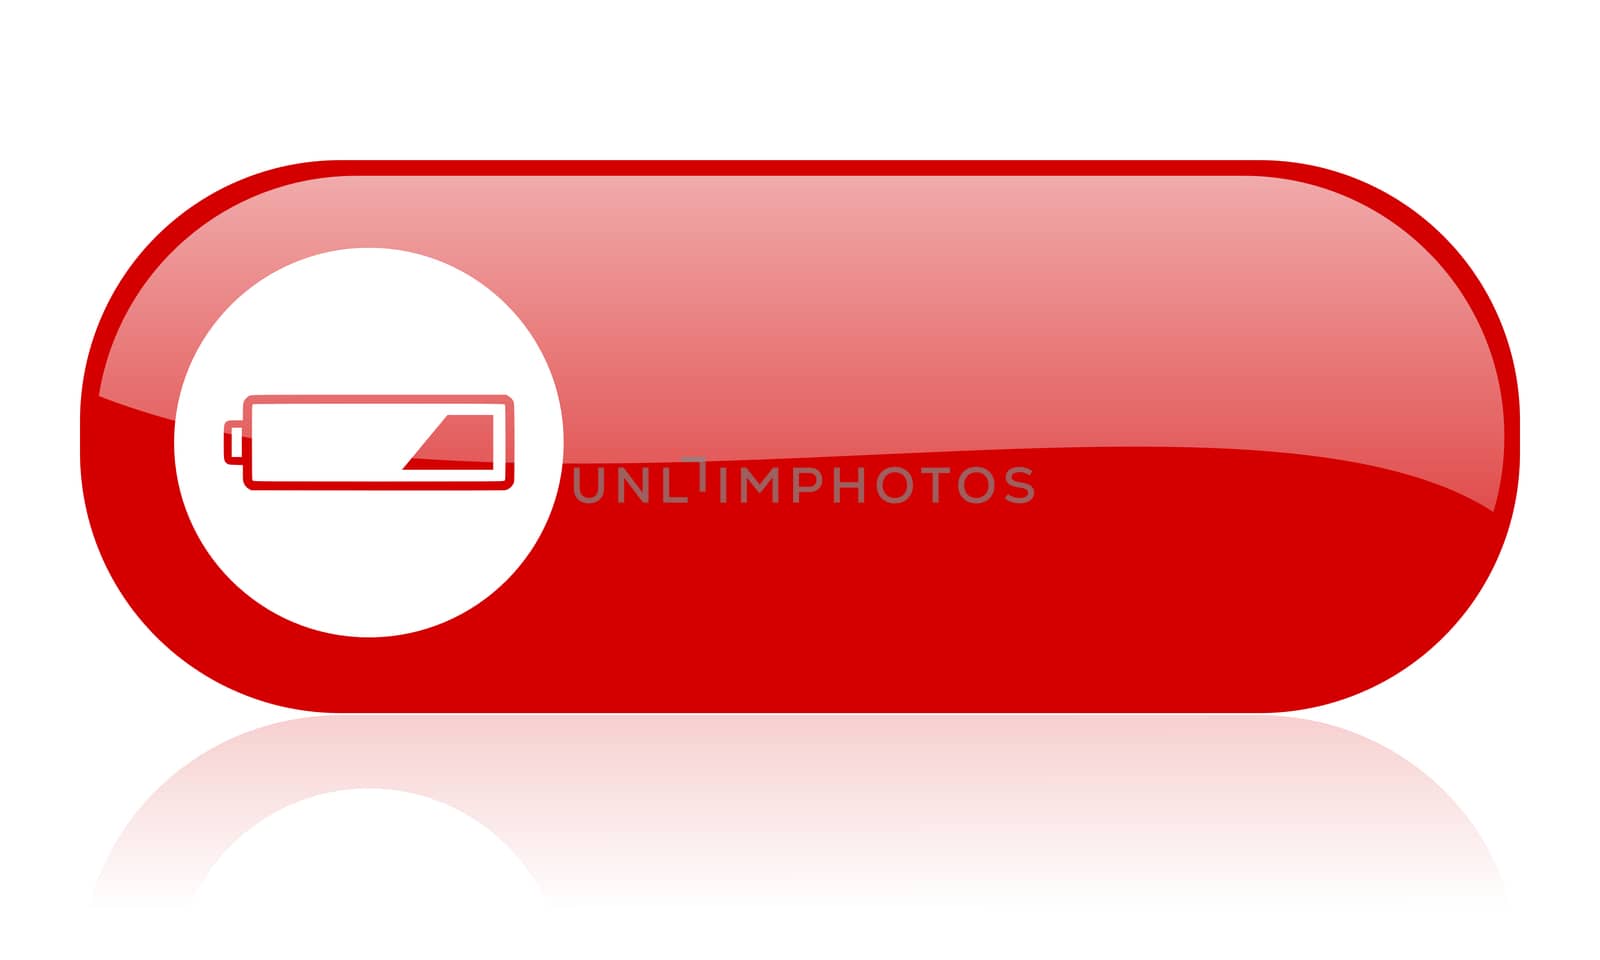 battery red web glossy icon